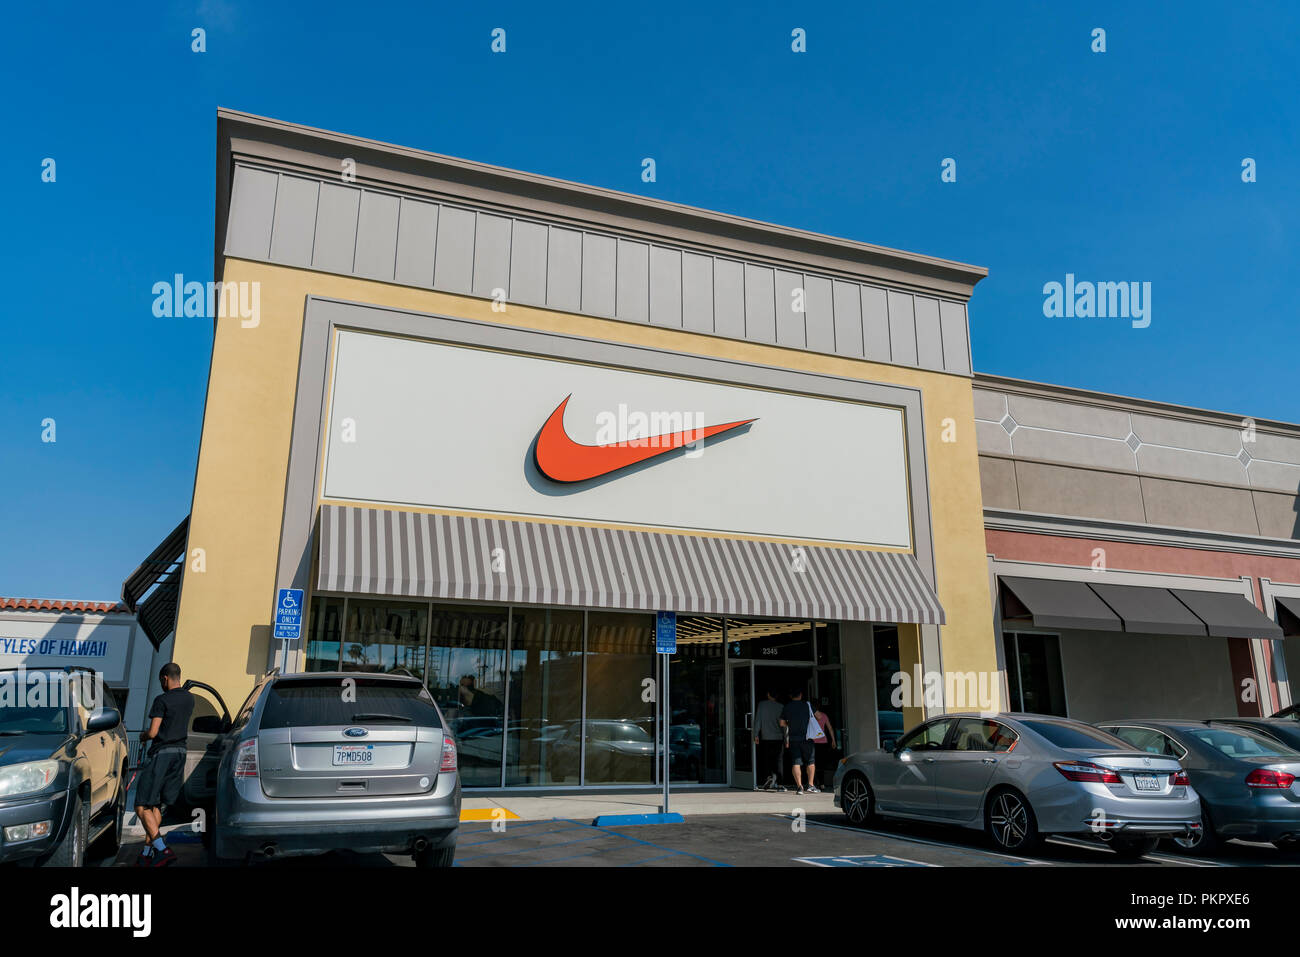 Los Angeles, JUL Big Nike sign of a store on JUL 15, 2018 at Los Angeles, Photo - Alamy